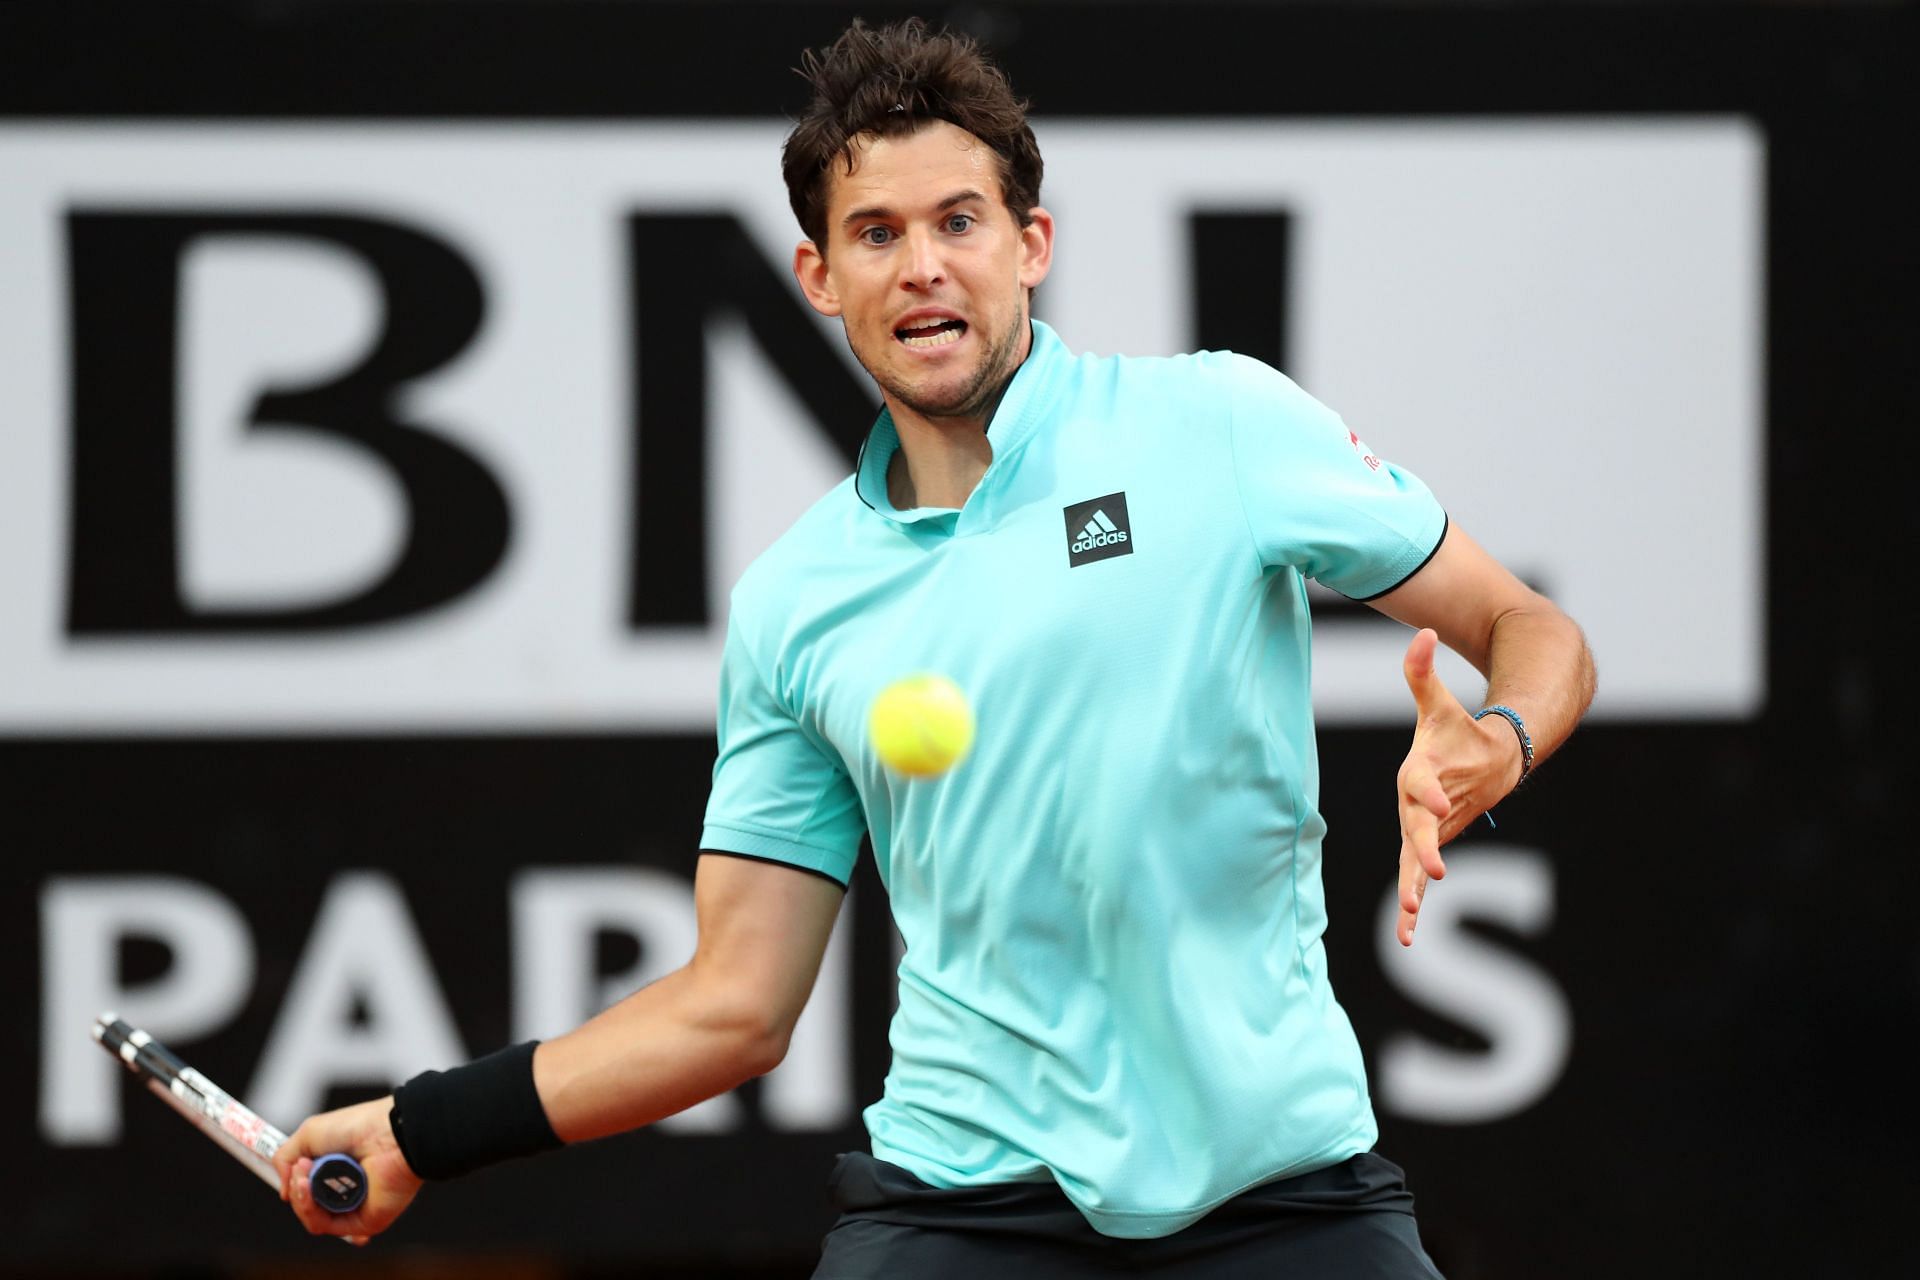 Thiem will fight to reach his second consecutive semifinal